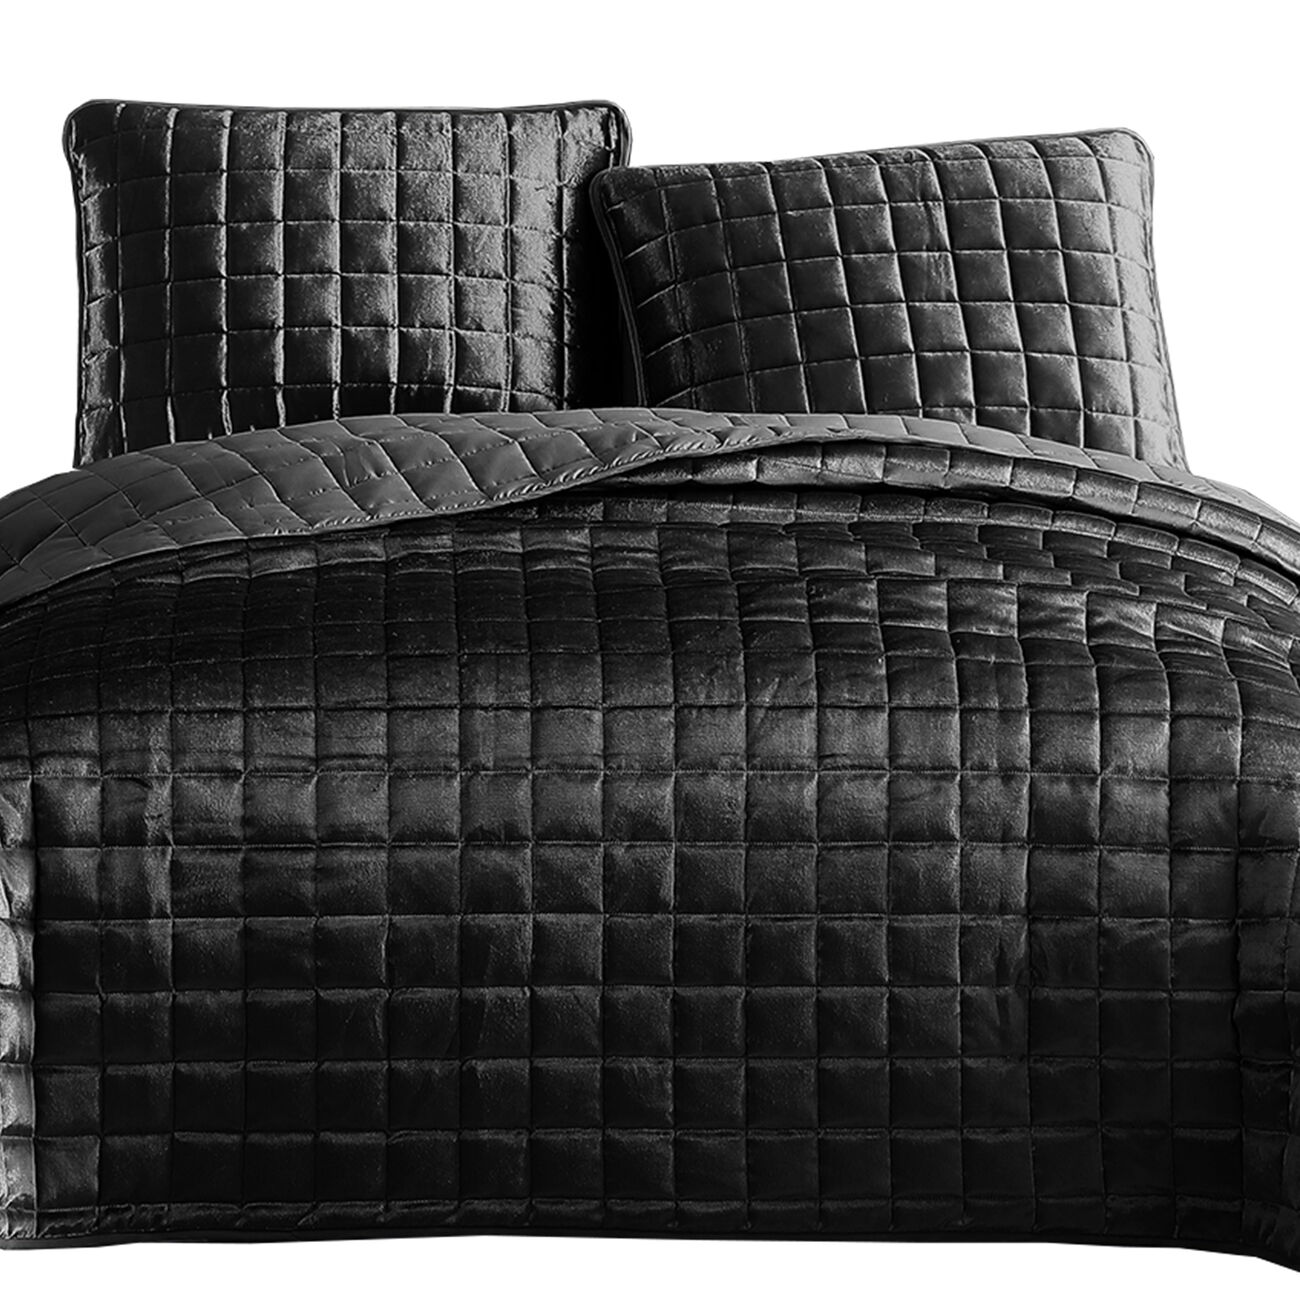 3 Piece King Size Coverlet Set with Stitched Square Pattern, Dark Gray